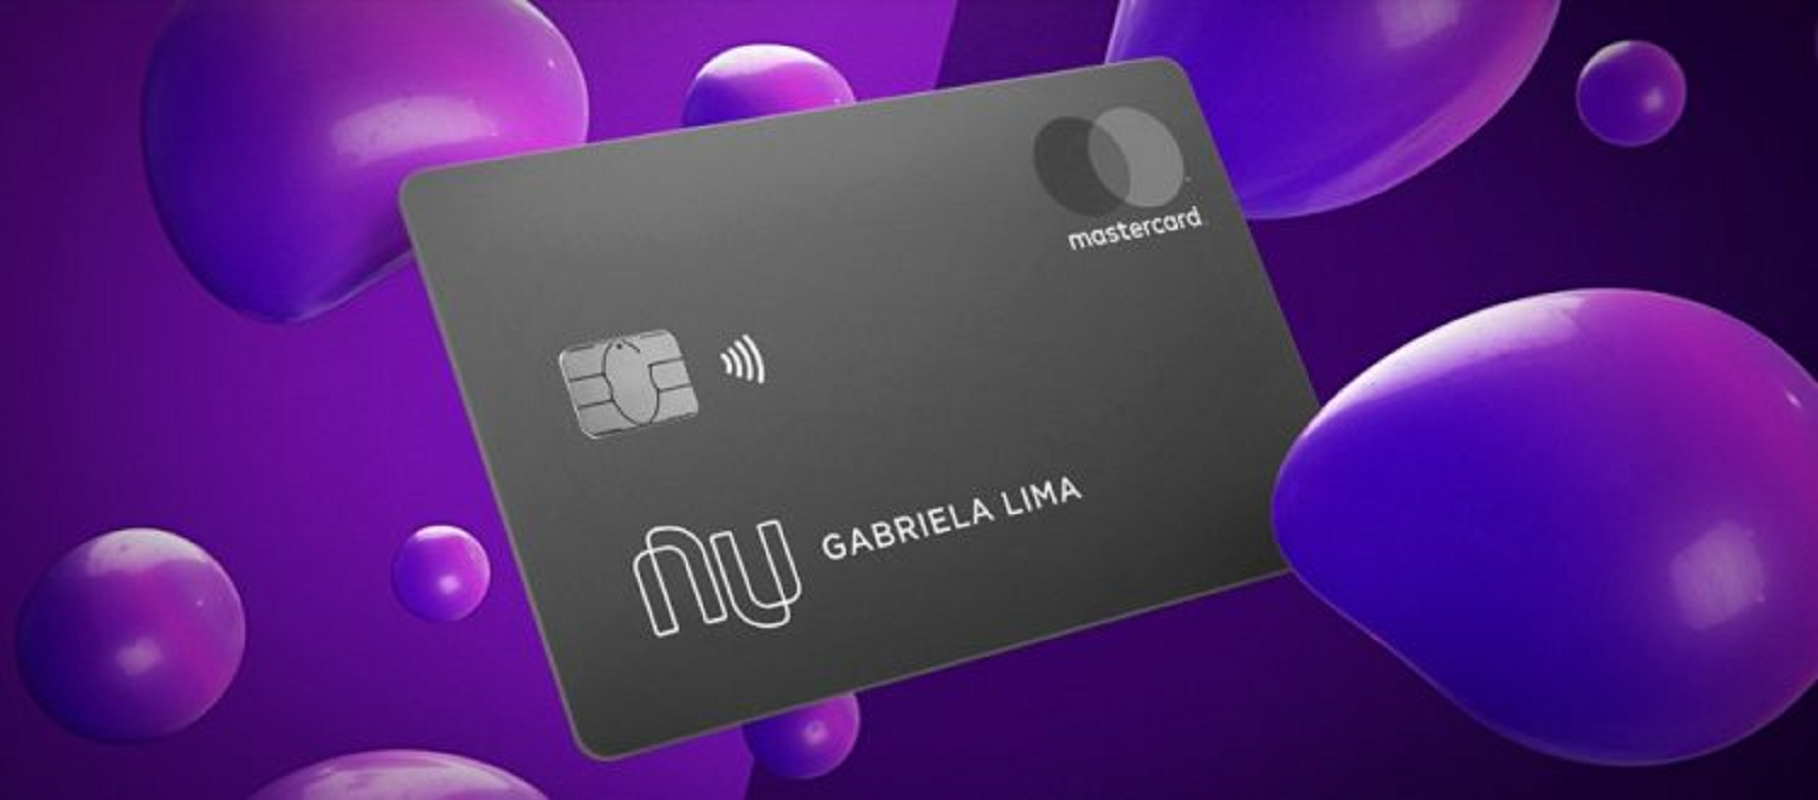 Learn the steps to unblock your Nubank Card